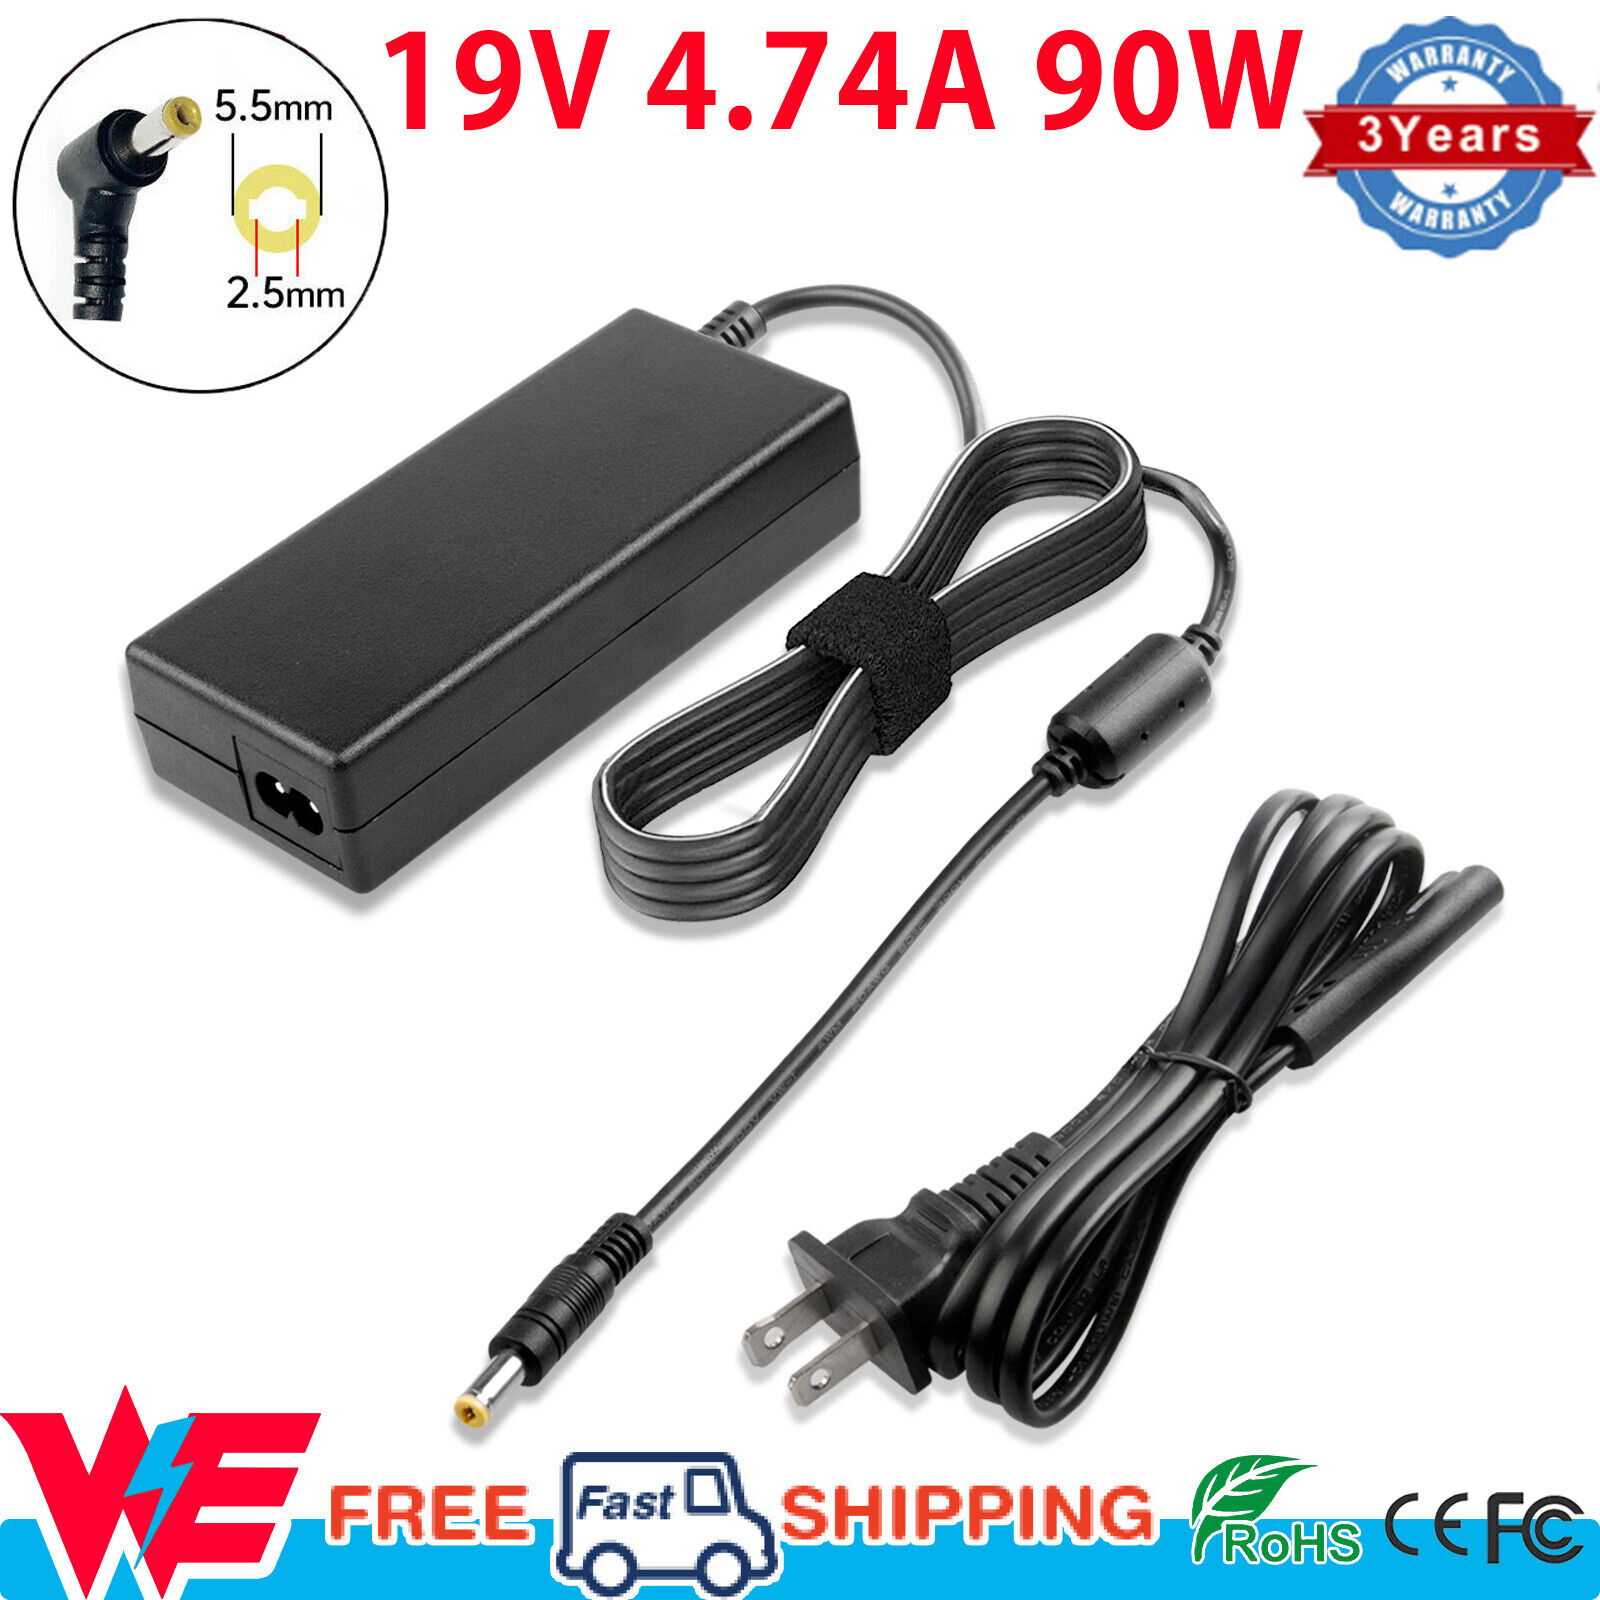 AC Adapter Charger For Toshiba Satellite A505-S6965, A505-S6966, A505-S6967